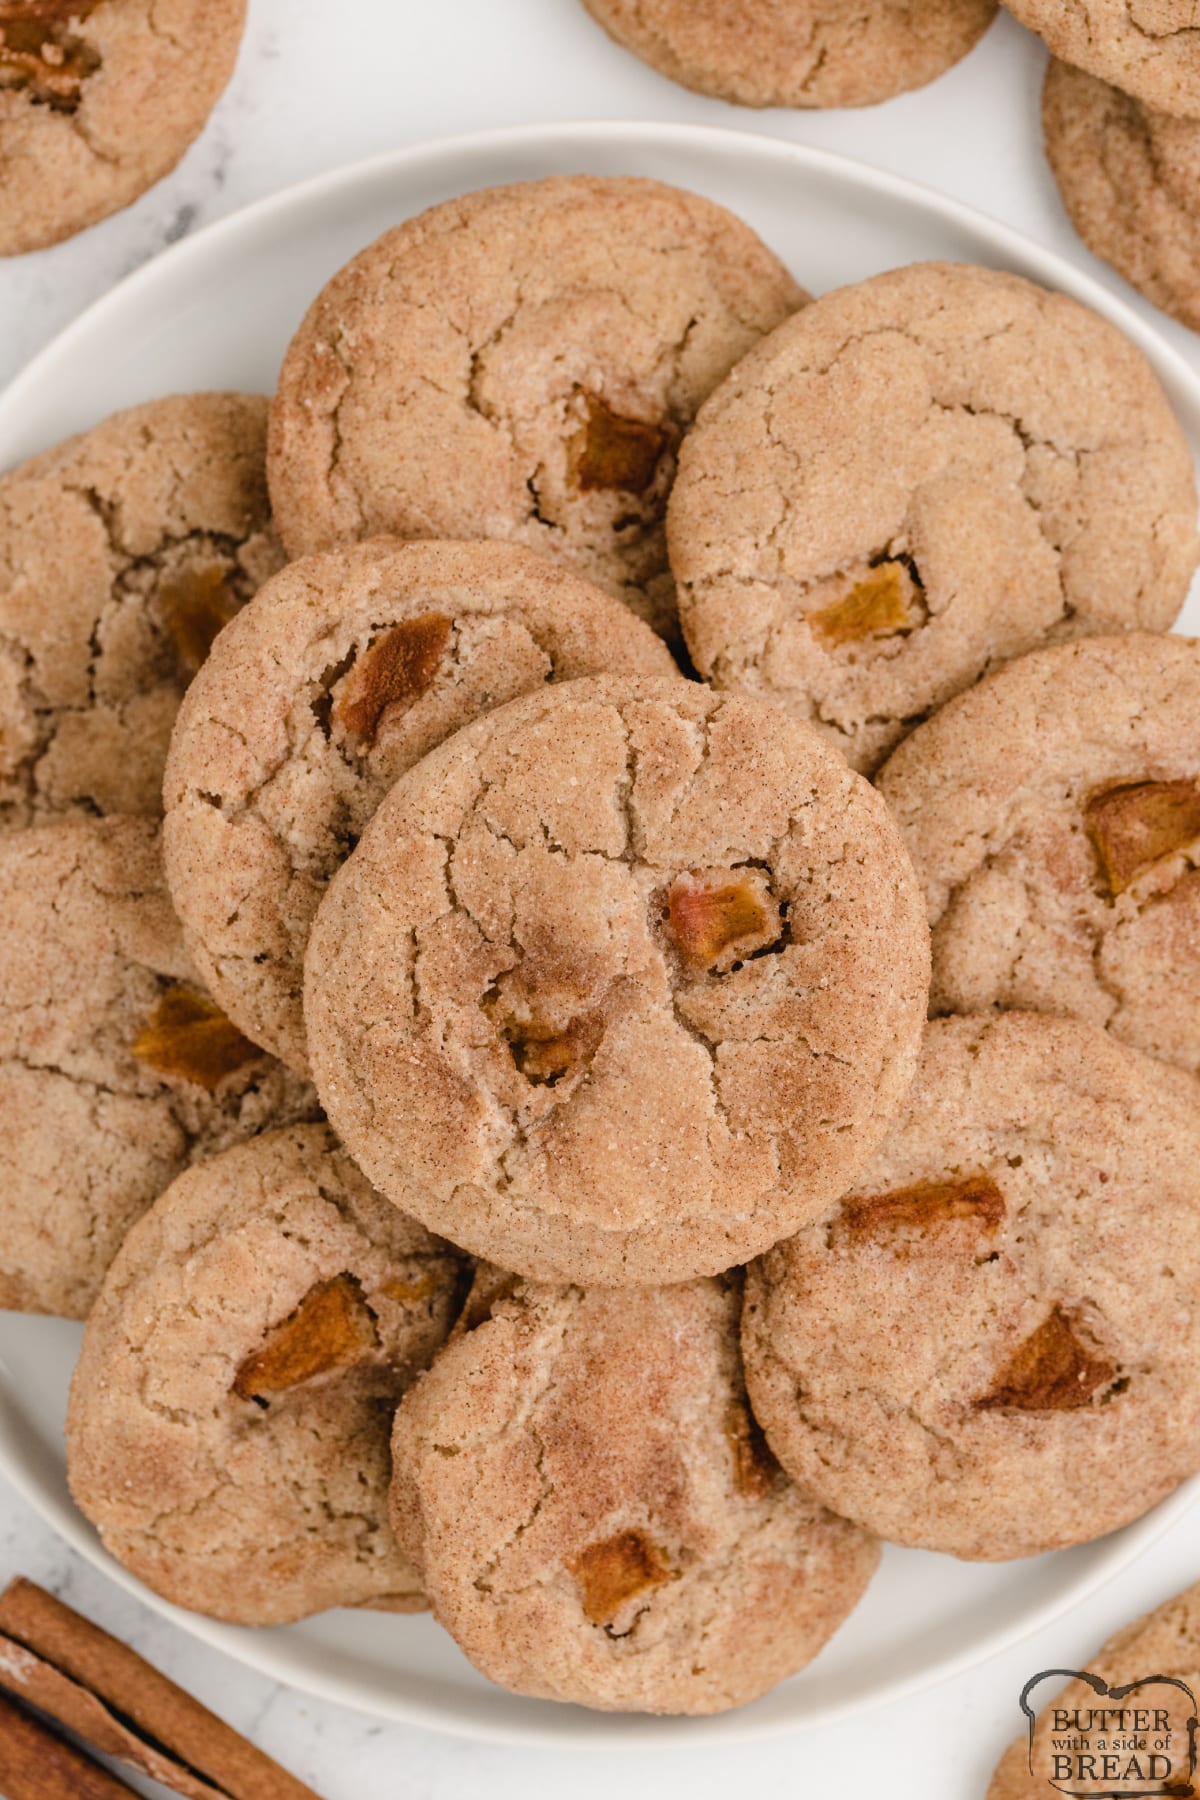 Peach Snickerdoodle Cookies are soft, chewy, delicious and the addition of fresh peaches takes your favorite cinnamon sugar cookie up a couple notches! These cookies with fruit are loaded with fresh, sweet peaches and lots of cinnamon flavor. 